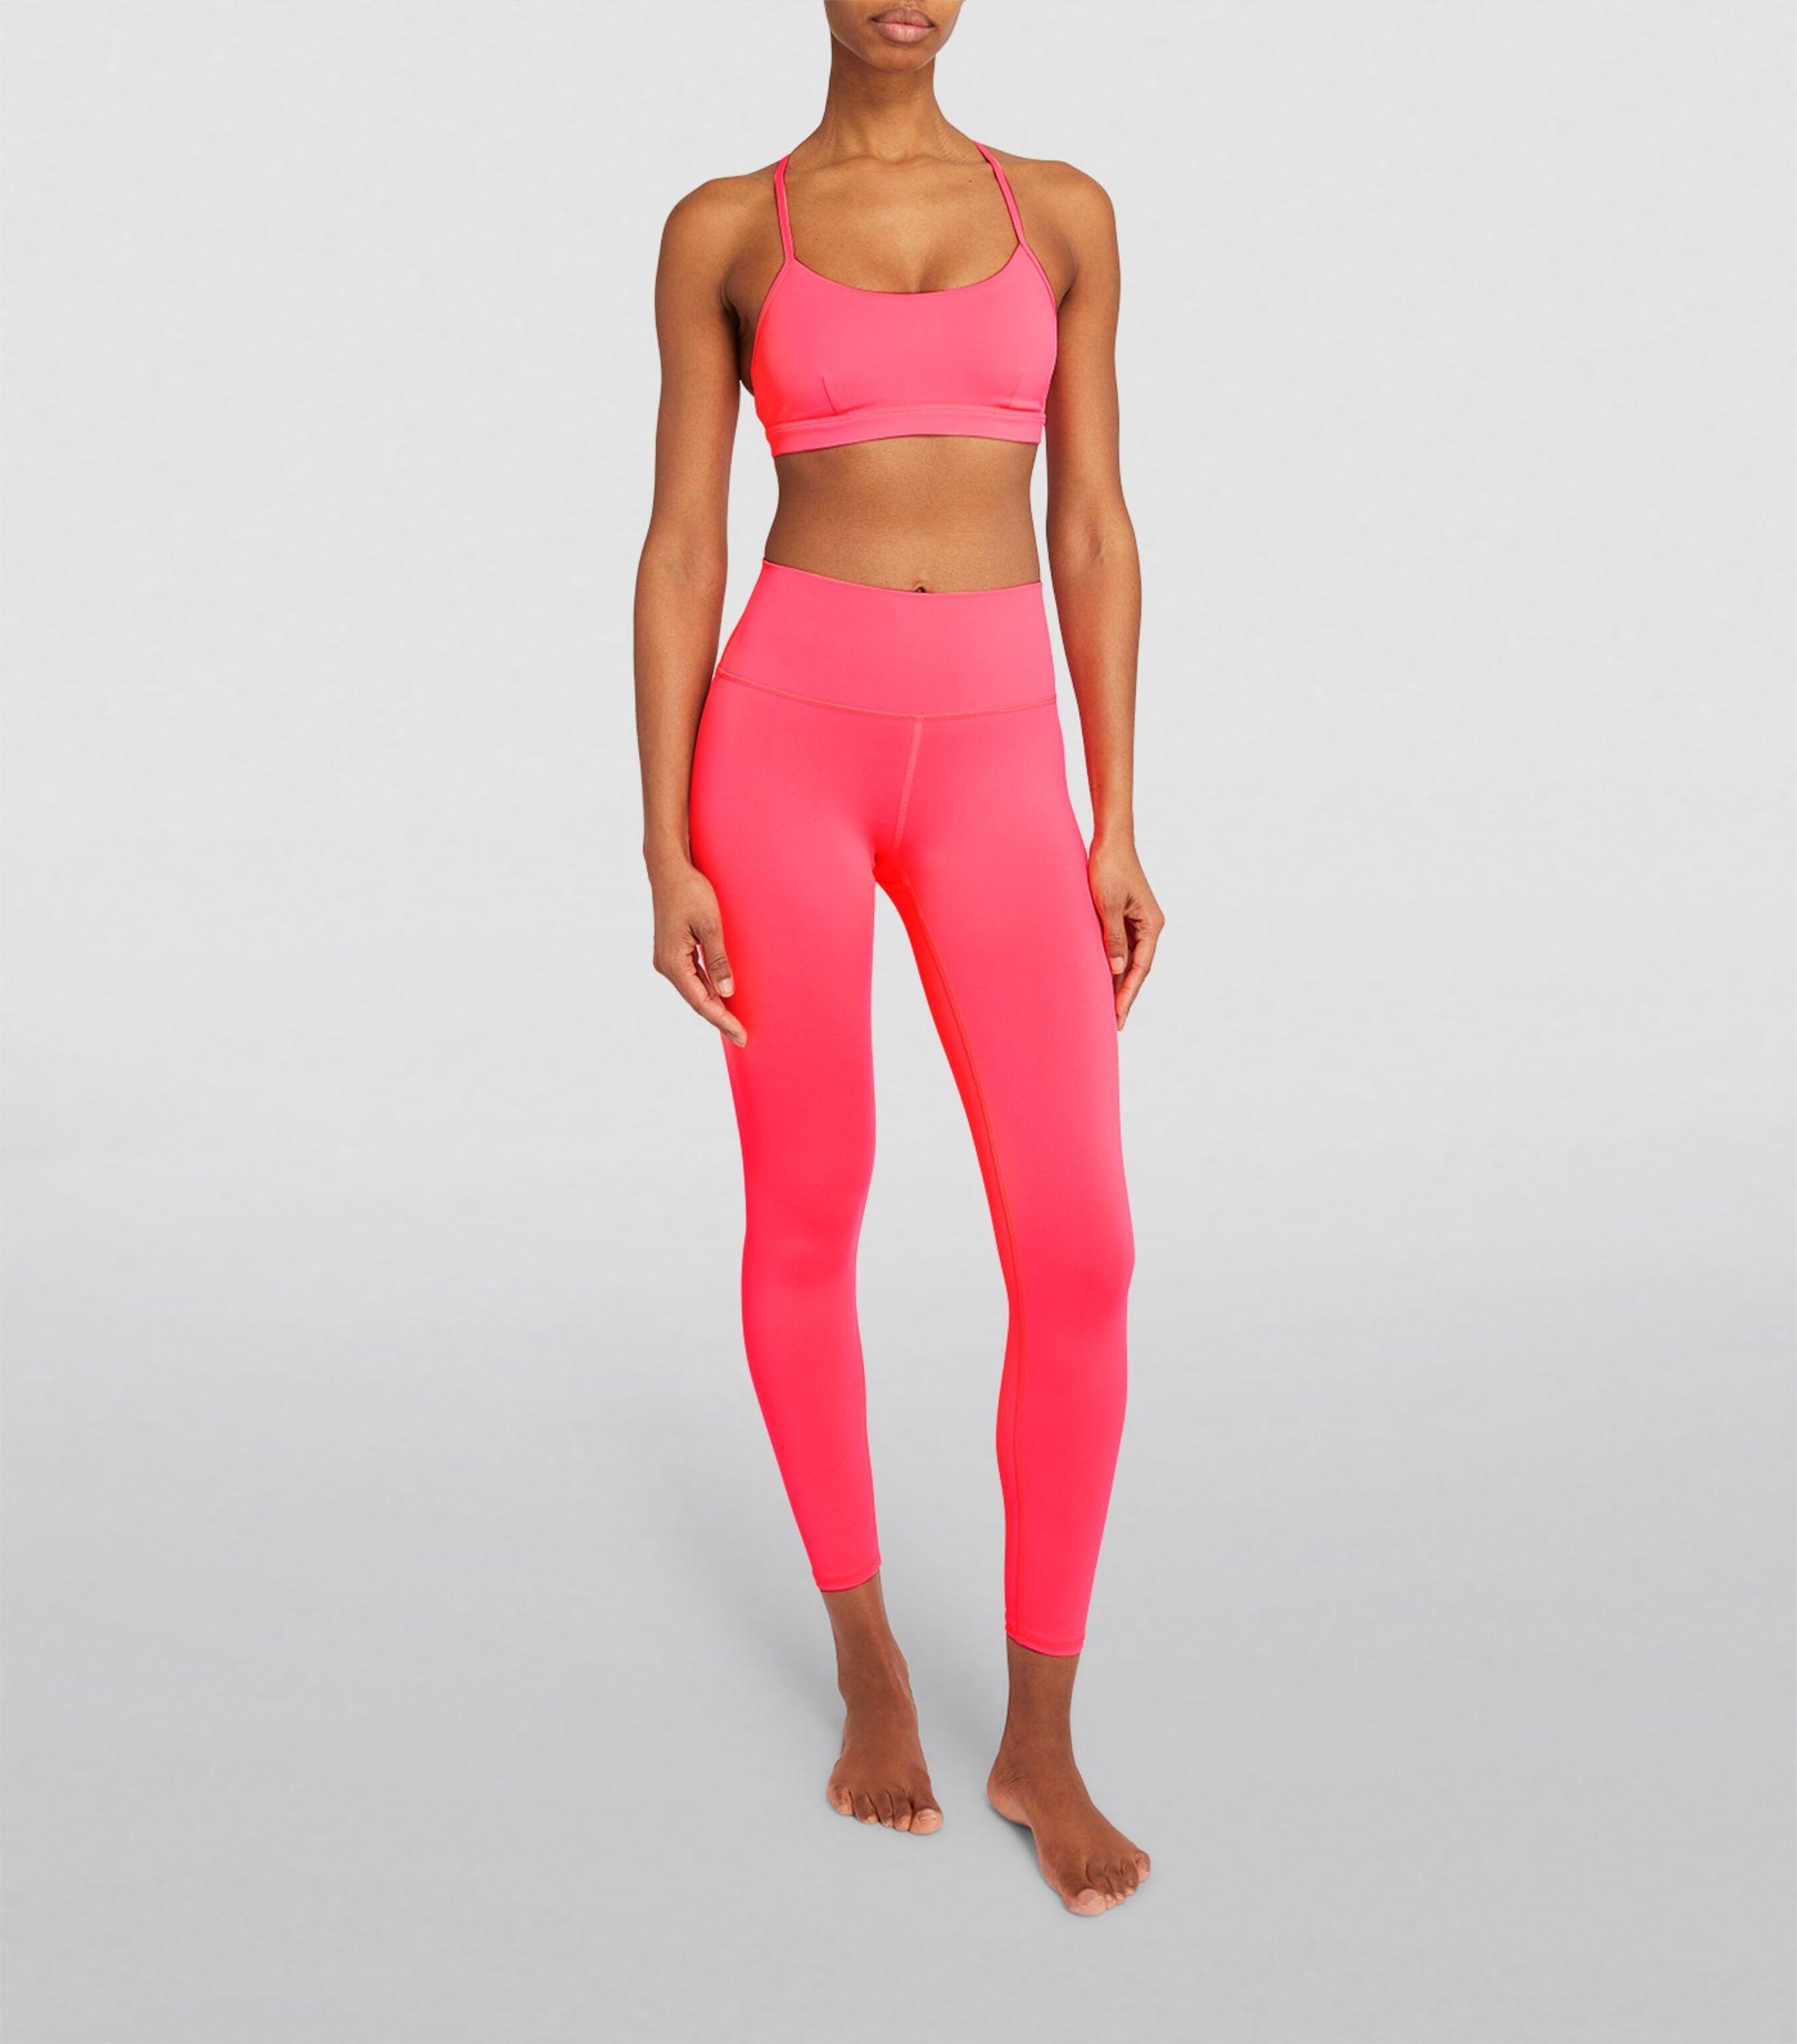 Alo Yoga Airlift Intrigue Sports Bra in Pink